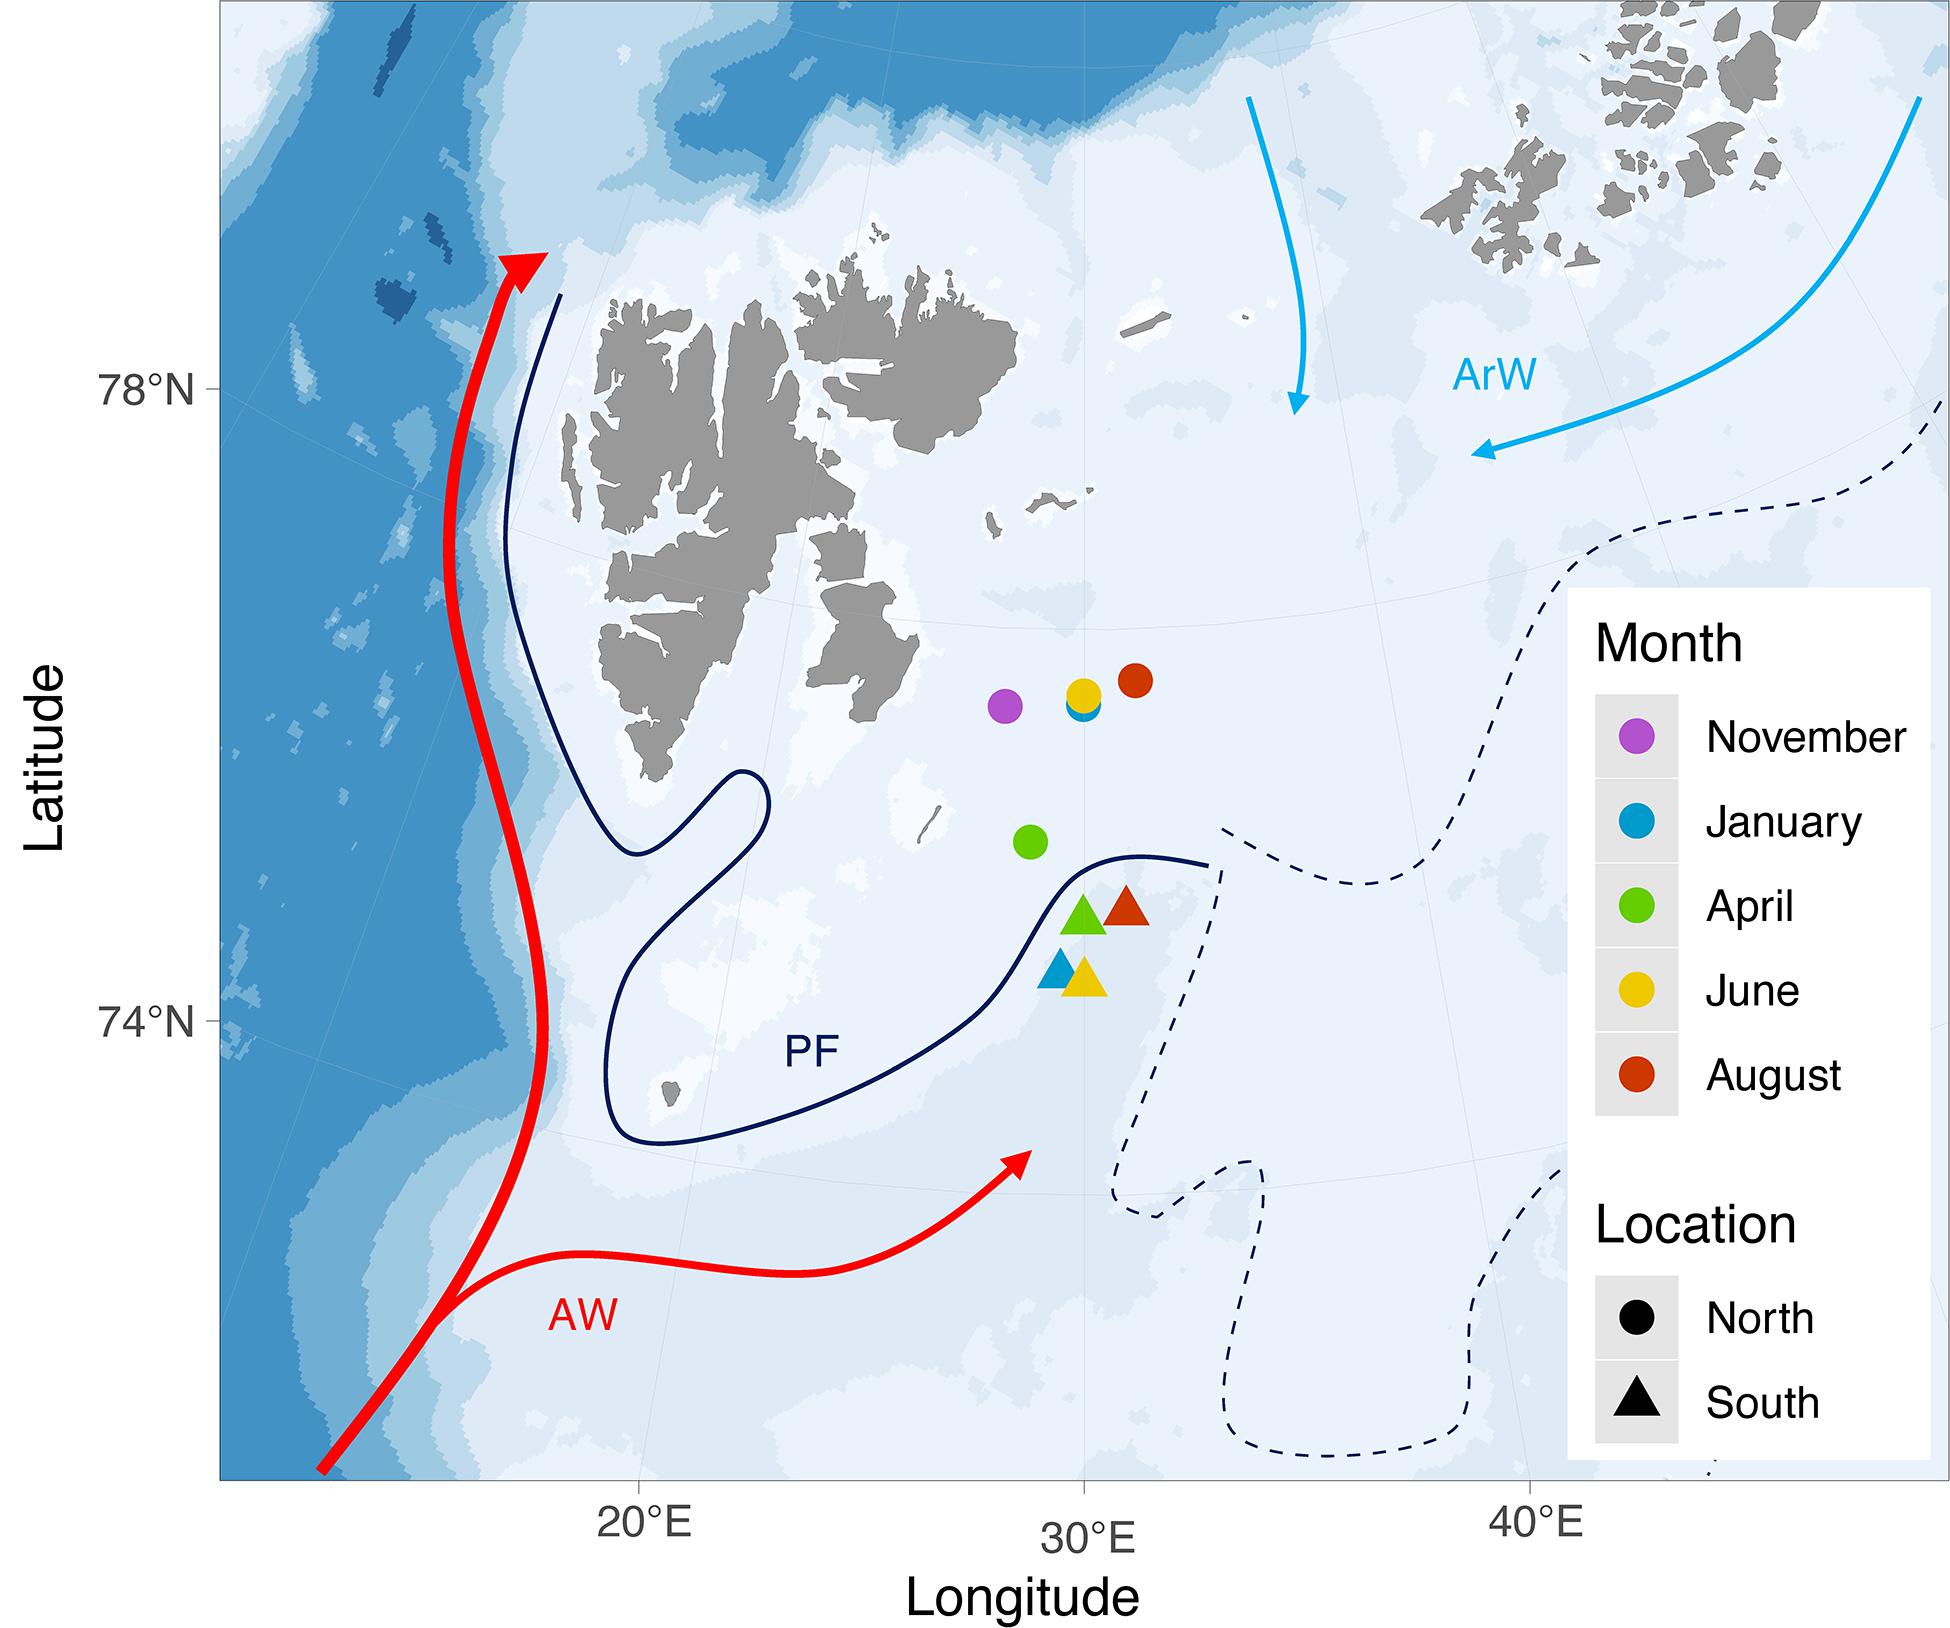 Frontiers | Meroplankton Diversity, Seasonality and Life-History Traits  Across the Barents Sea Polar Front Revealed by High-Throughput DNA Barcoding